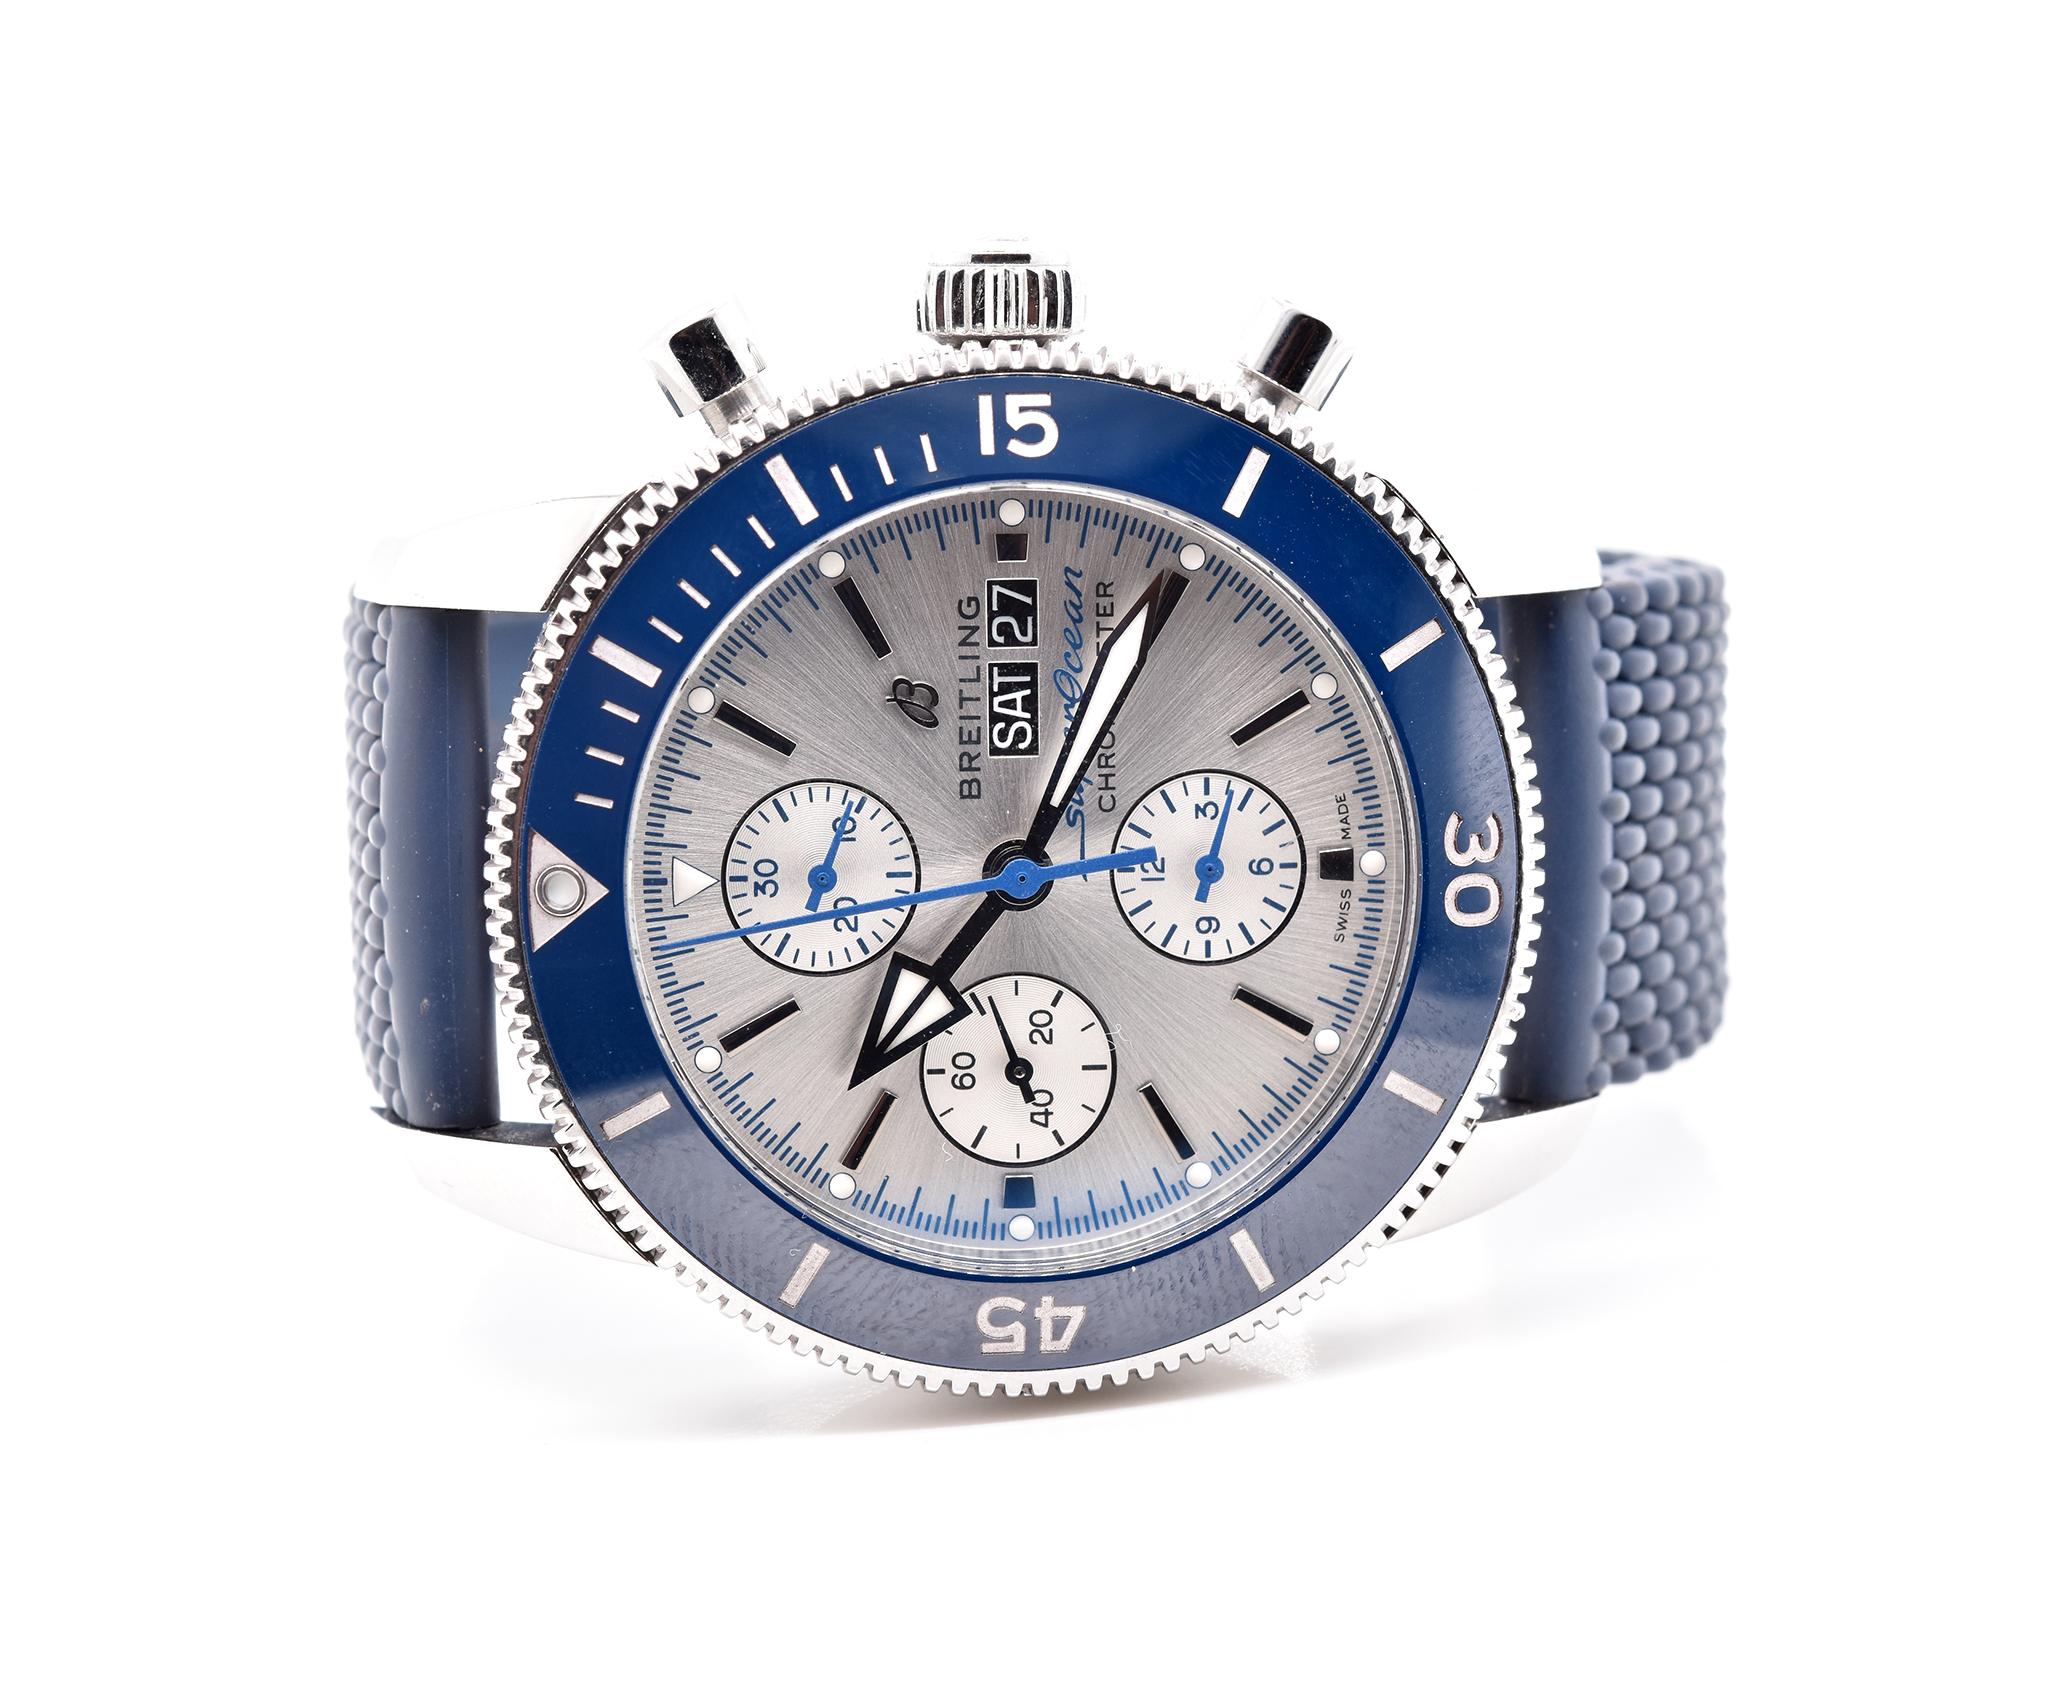 Designer: Breitling
Movement: automatic
Function: hours, minutes, small seconds, chronograph
Case: round 44mm stainless steel case, scratch resistant sapphire crystal, water resistant to 200m
Dial: white dial, luminescent hands, day-date at 3